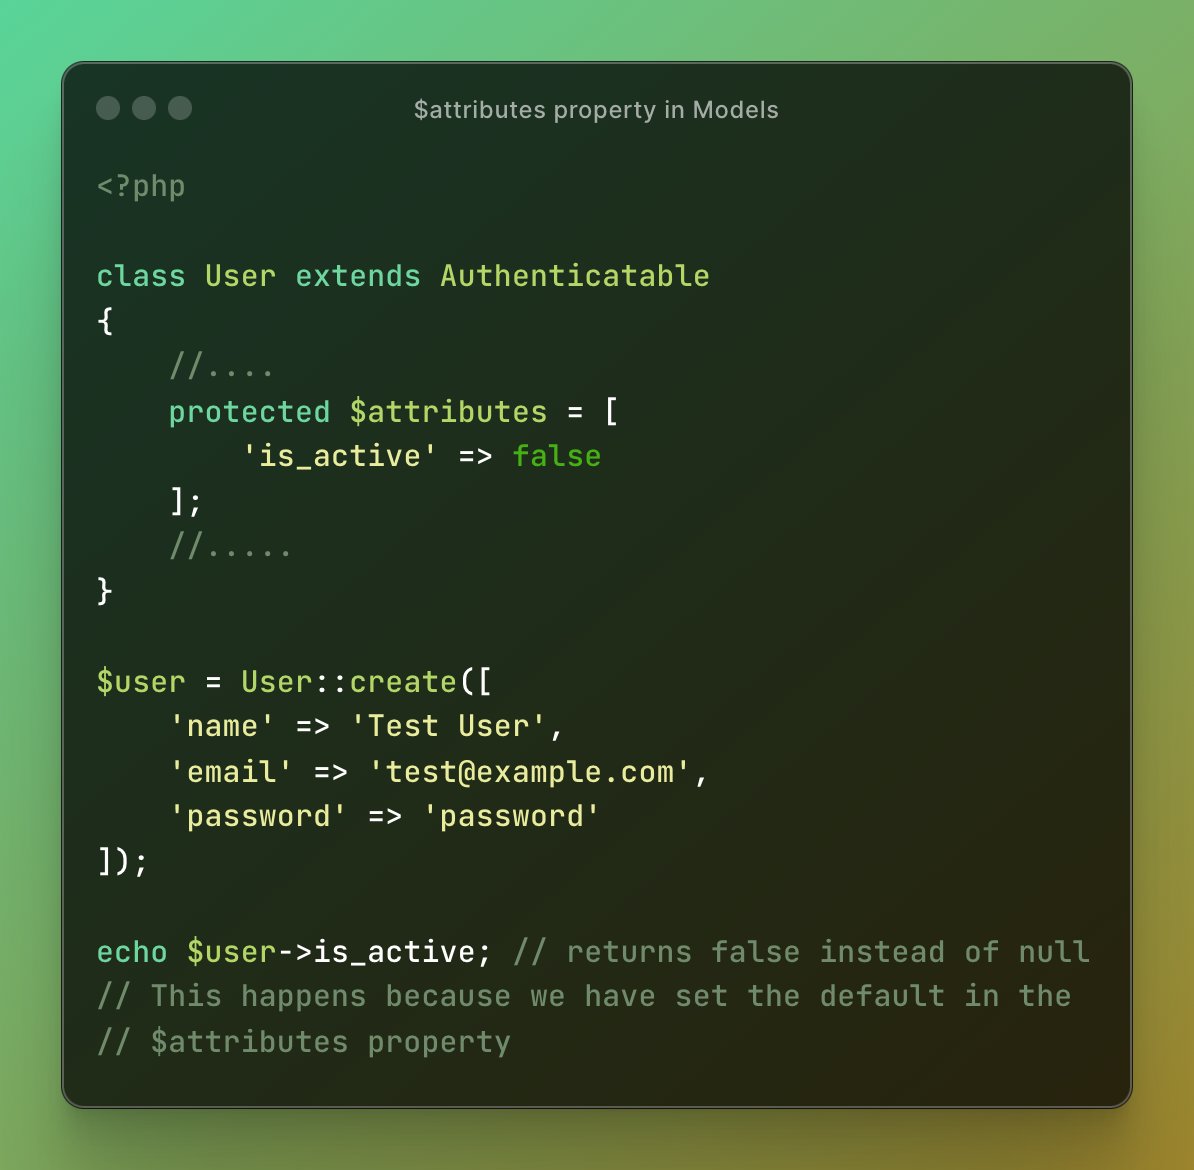 Hey Laravel Developers 👩‍💻

Models in Laravel are hydrated as and when we set attributes on them.

But sometimes we might want some attributes to be set on the model by default, in case they are not provided by the developer.

In that case, we can override the $attributes…